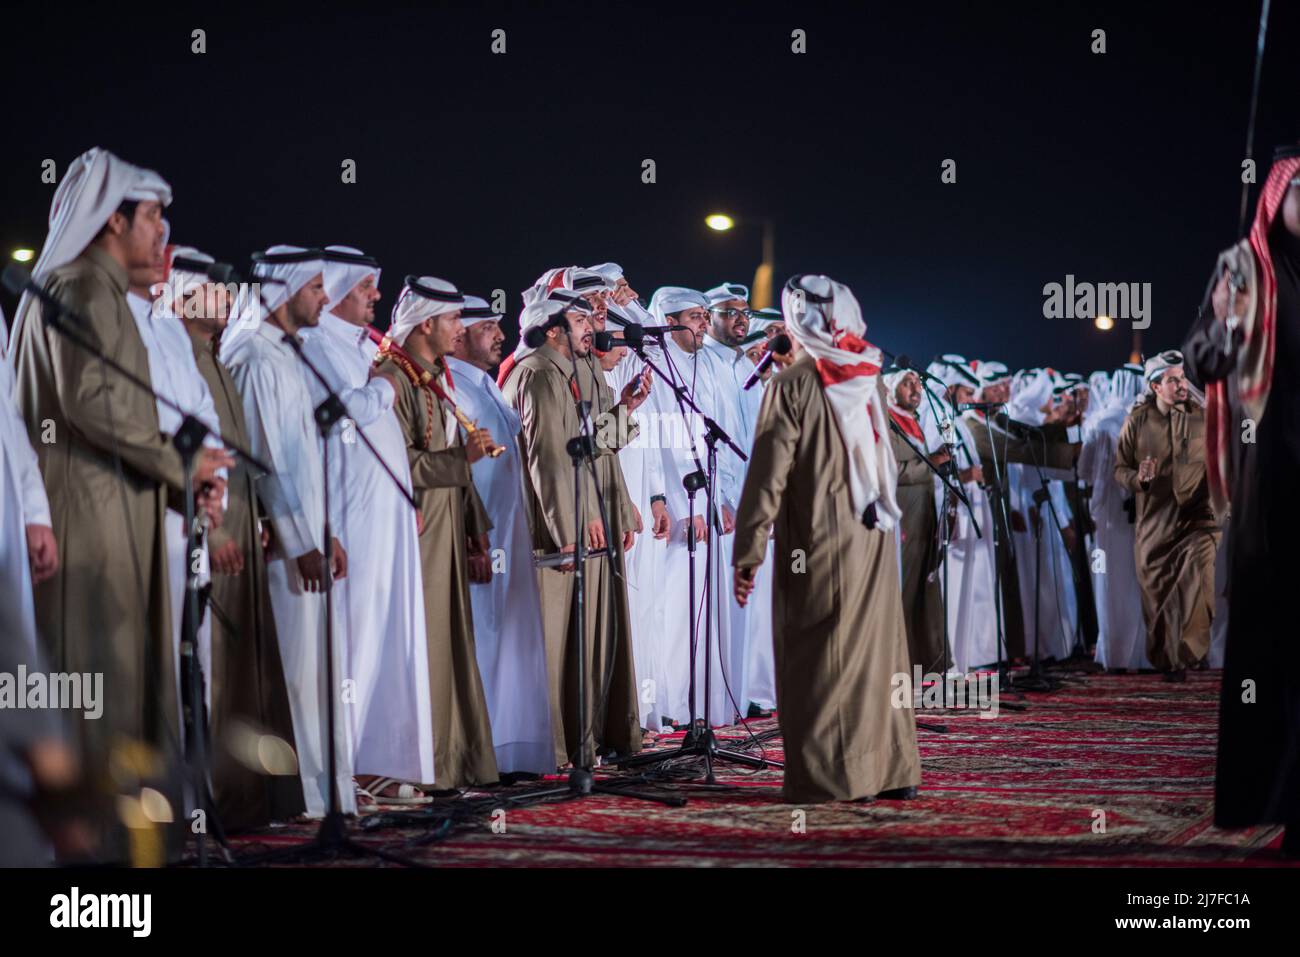 Doha, Qatar, December 18,2017: The drummers dressed in traditional clothes  as part of a performance called the "ardha" sword dance at the Darb Al Saai  Stock Photo - Alamy